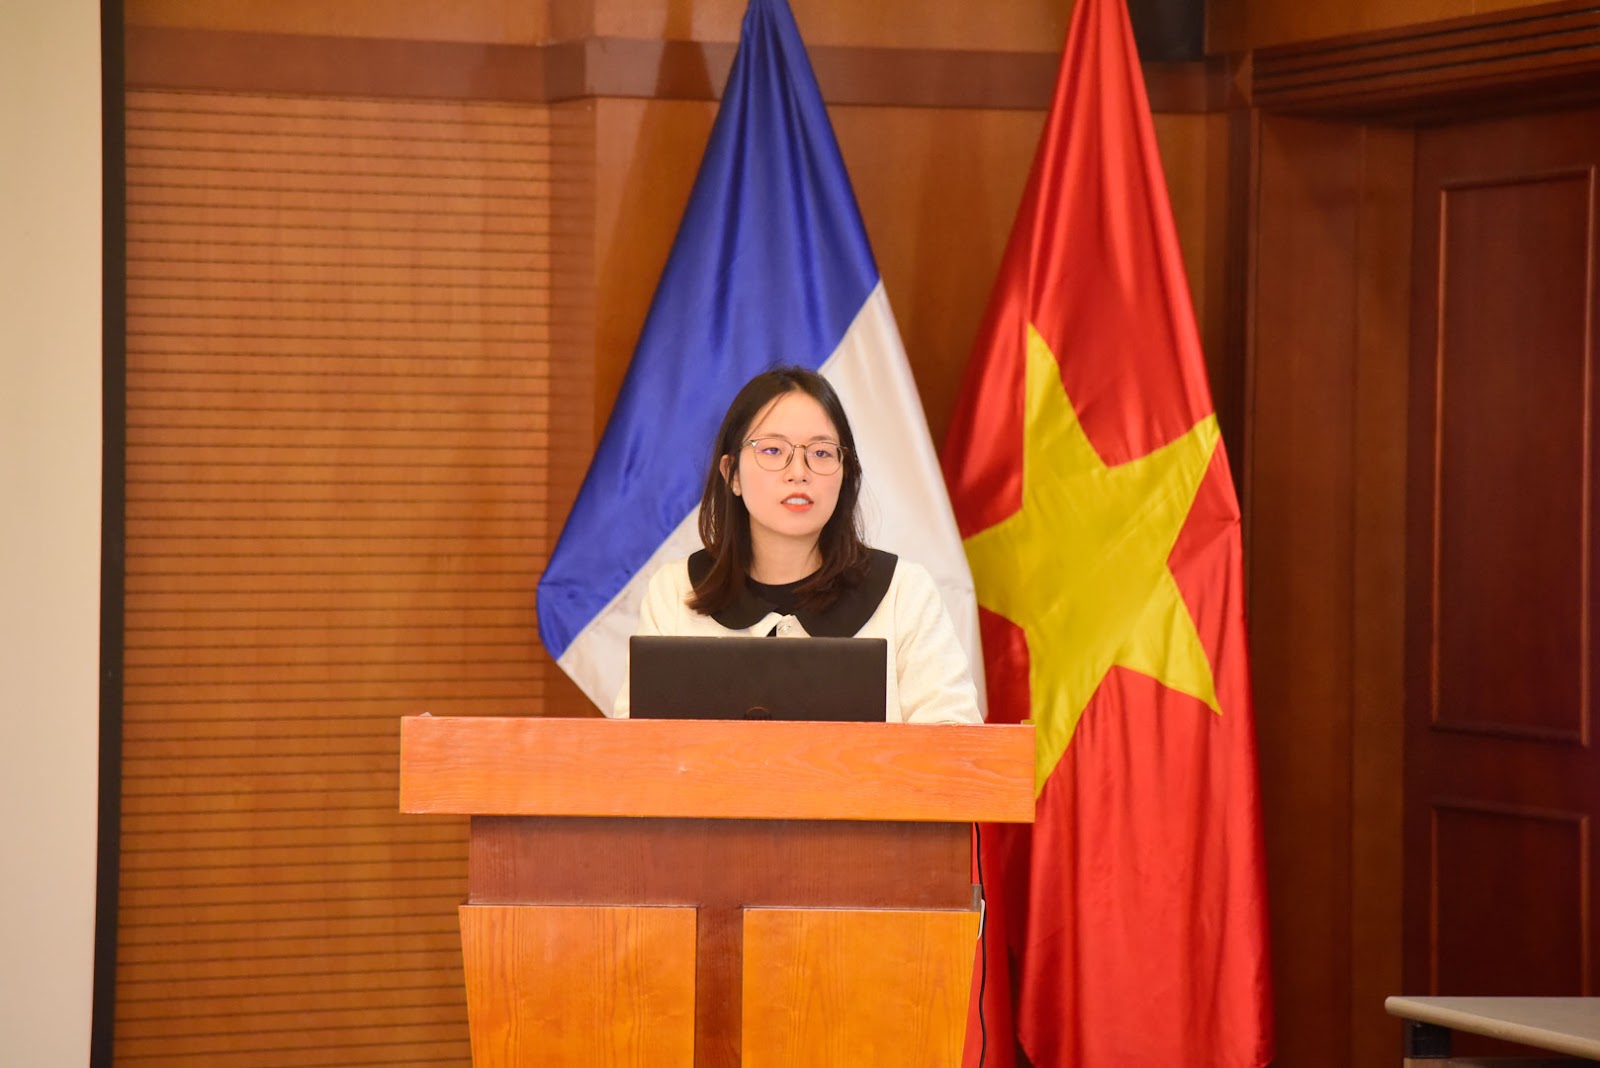 Ms. Do Thi Thuy Trang, Deputy Head of International Cooperation Department shared an overview of the internship with students